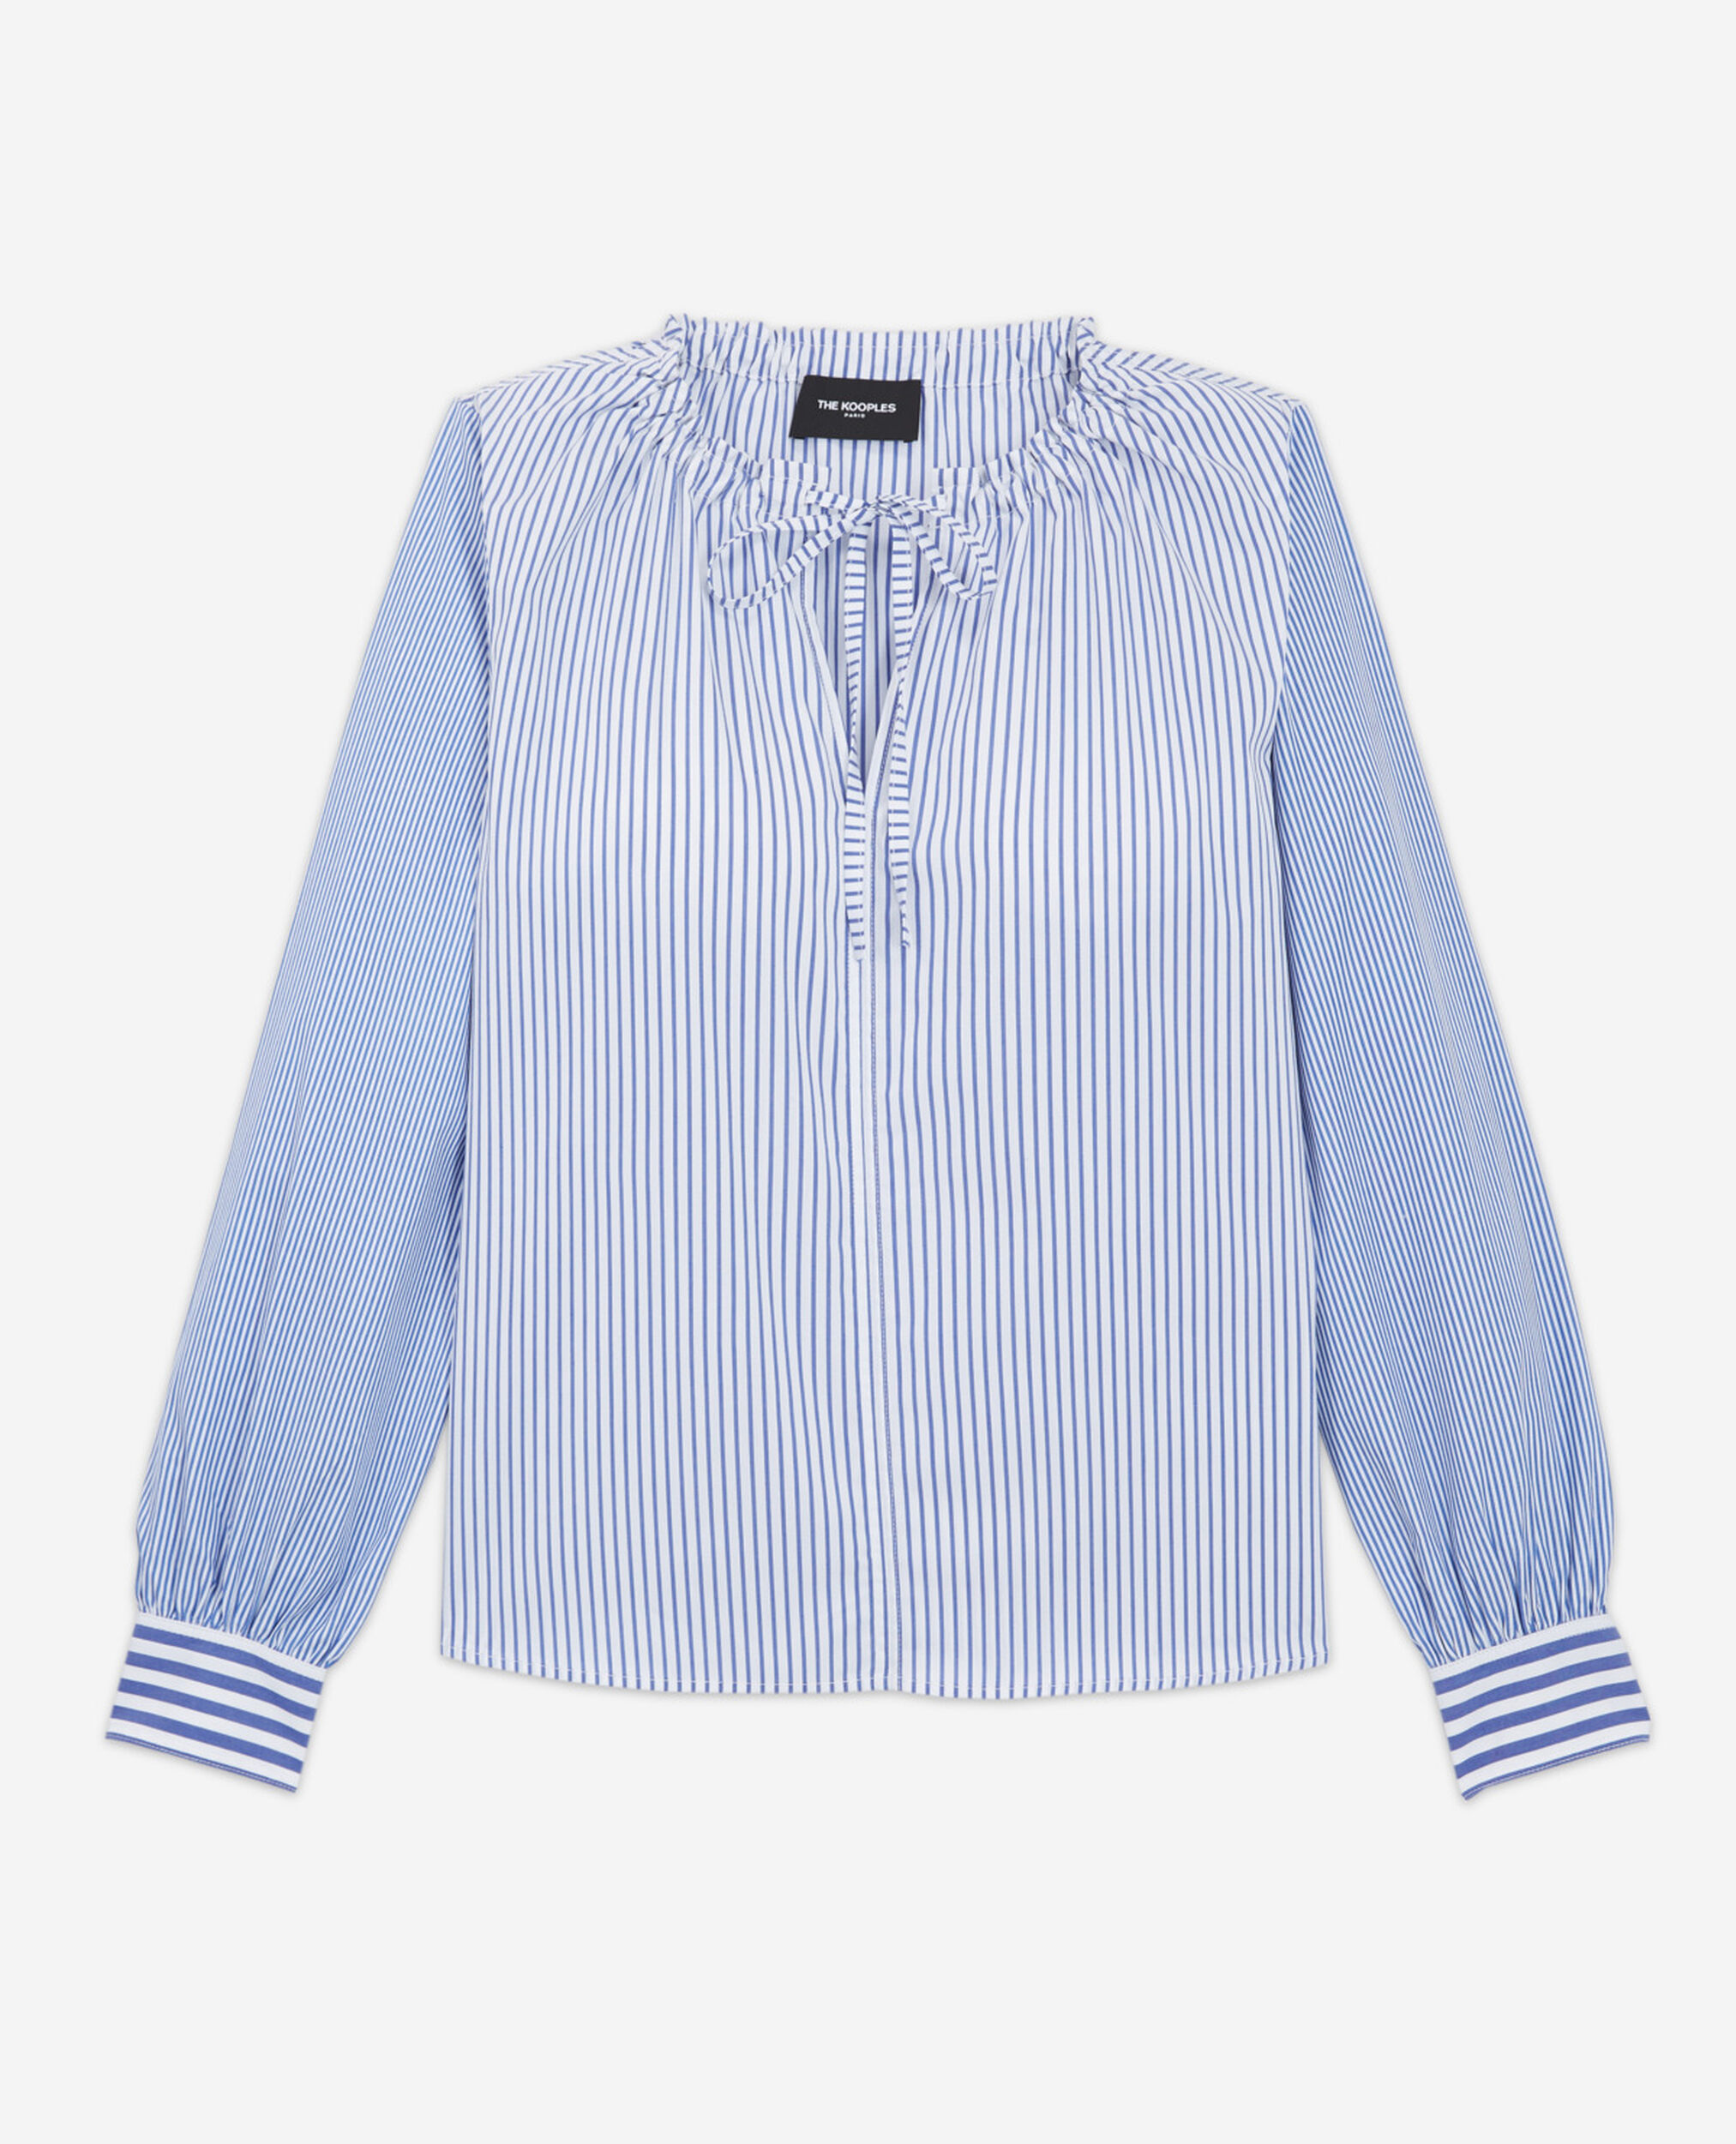 Striped cotton printed blue top with tie-drop neck, BLUE WHITE, hi-res image number null